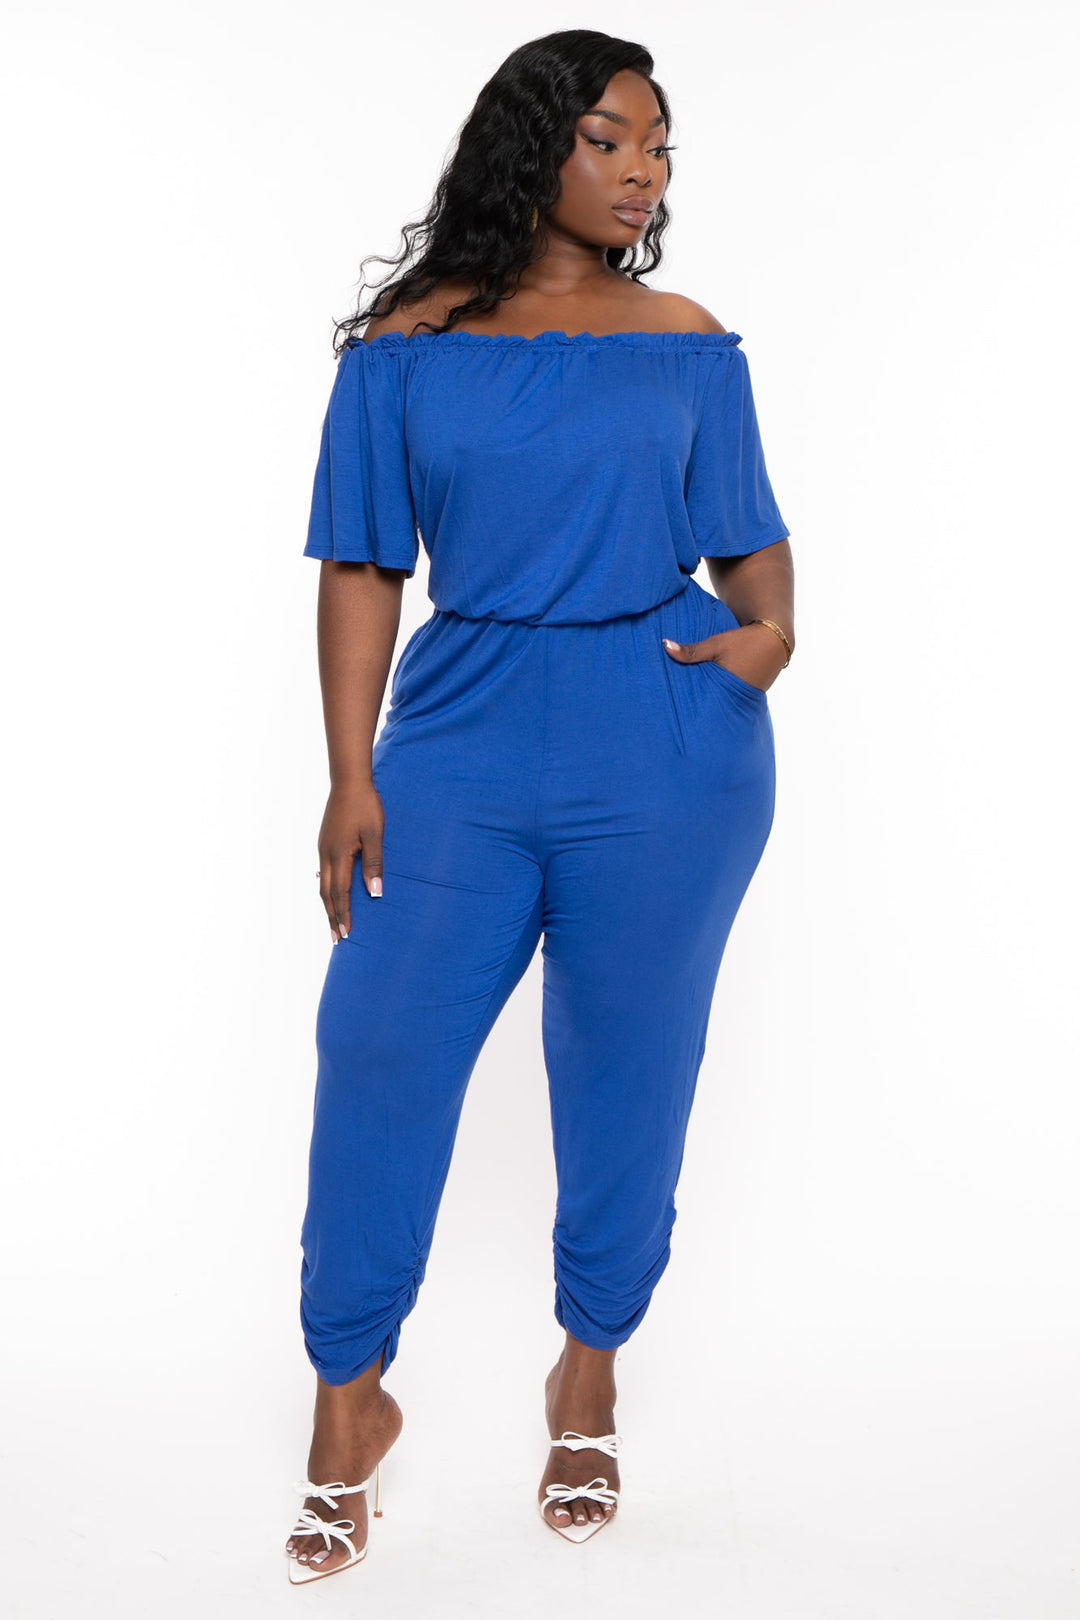 Jumpsuits for Women Dressy Women's Casual Solid Cameroon